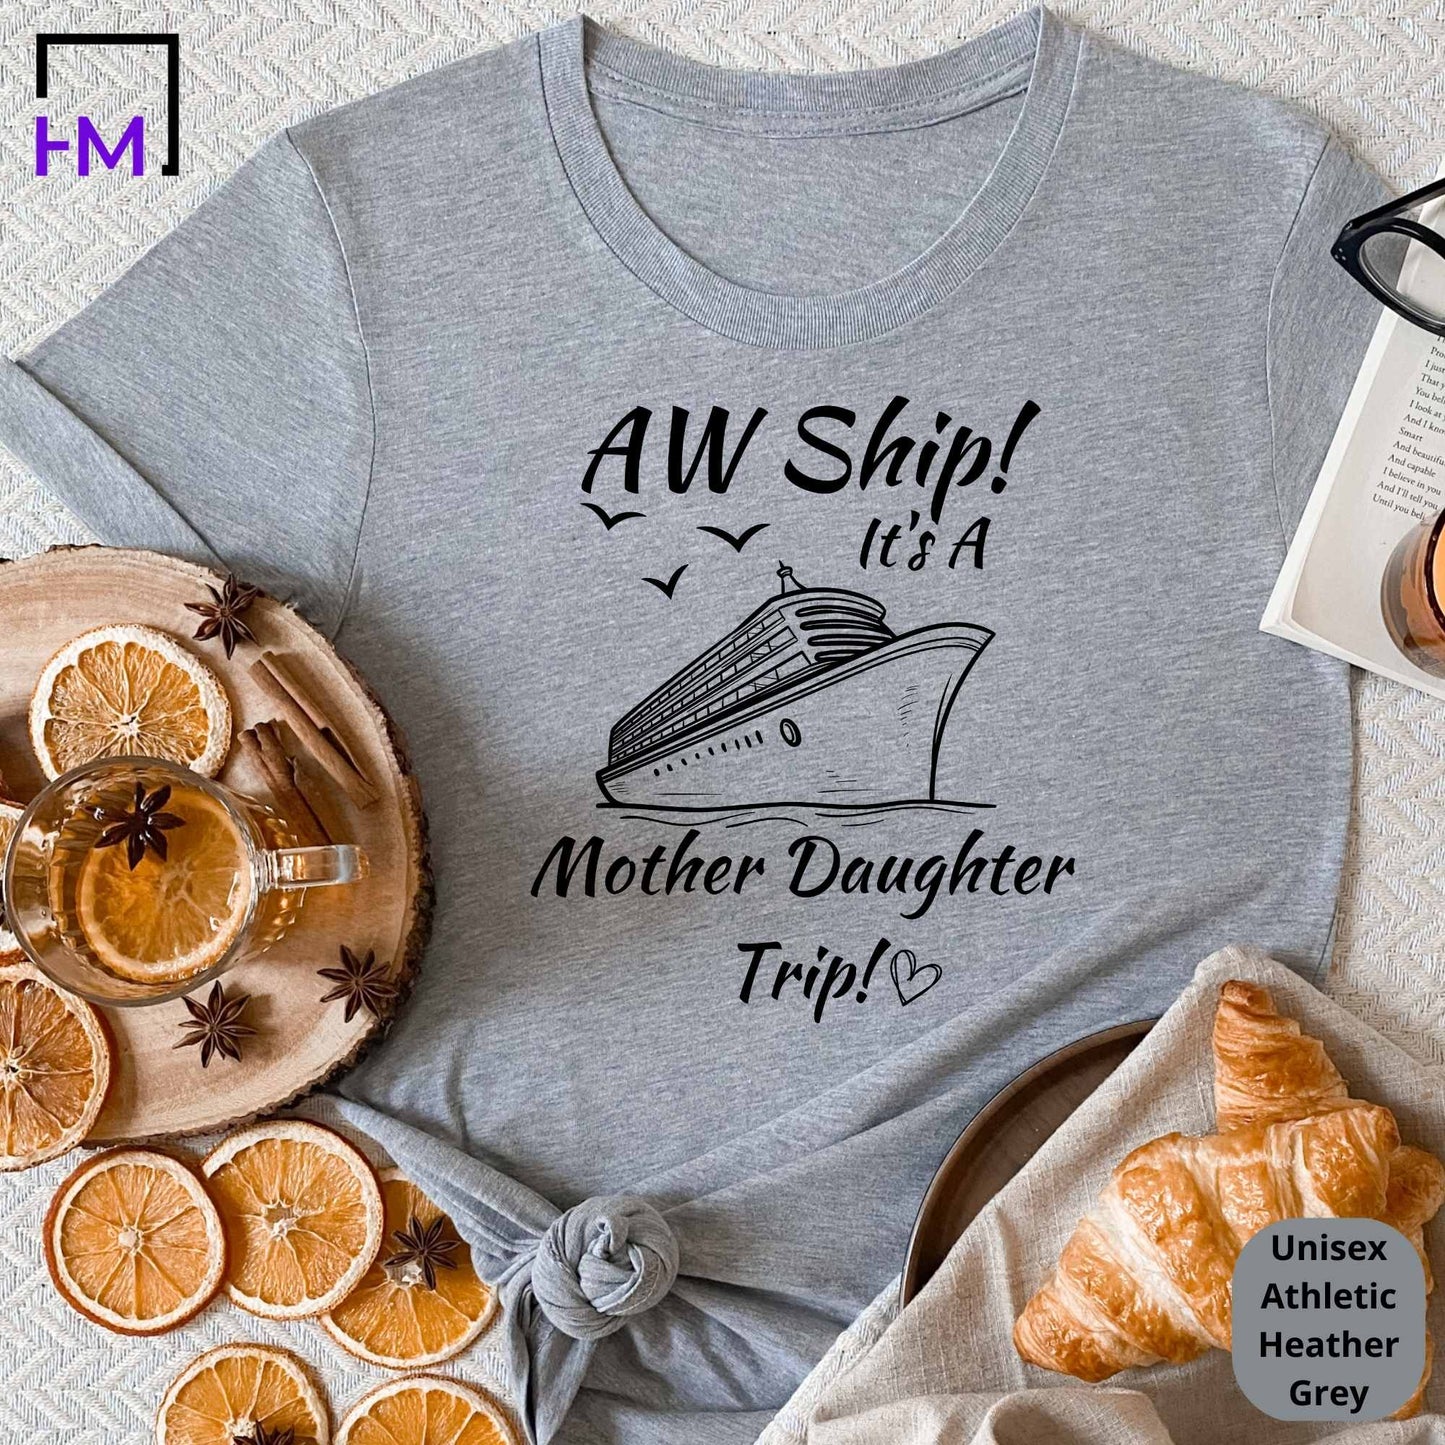 Aw Ship! It's a Mother and Daughter Trip Cruise Shirt